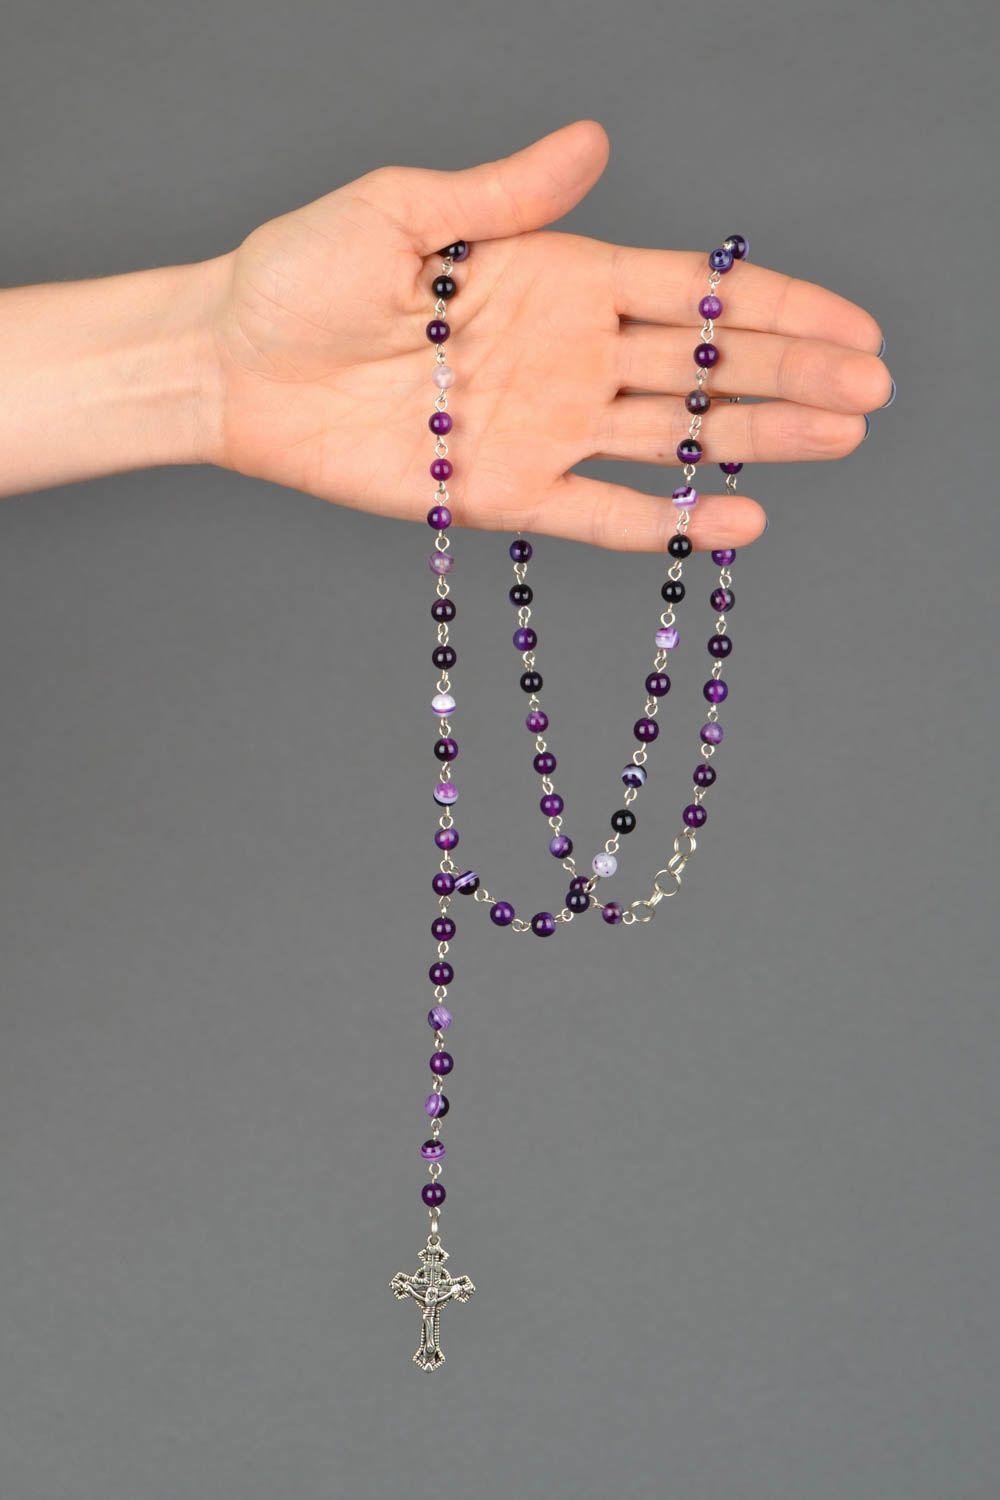 Natural stone rosary necklace photo 1